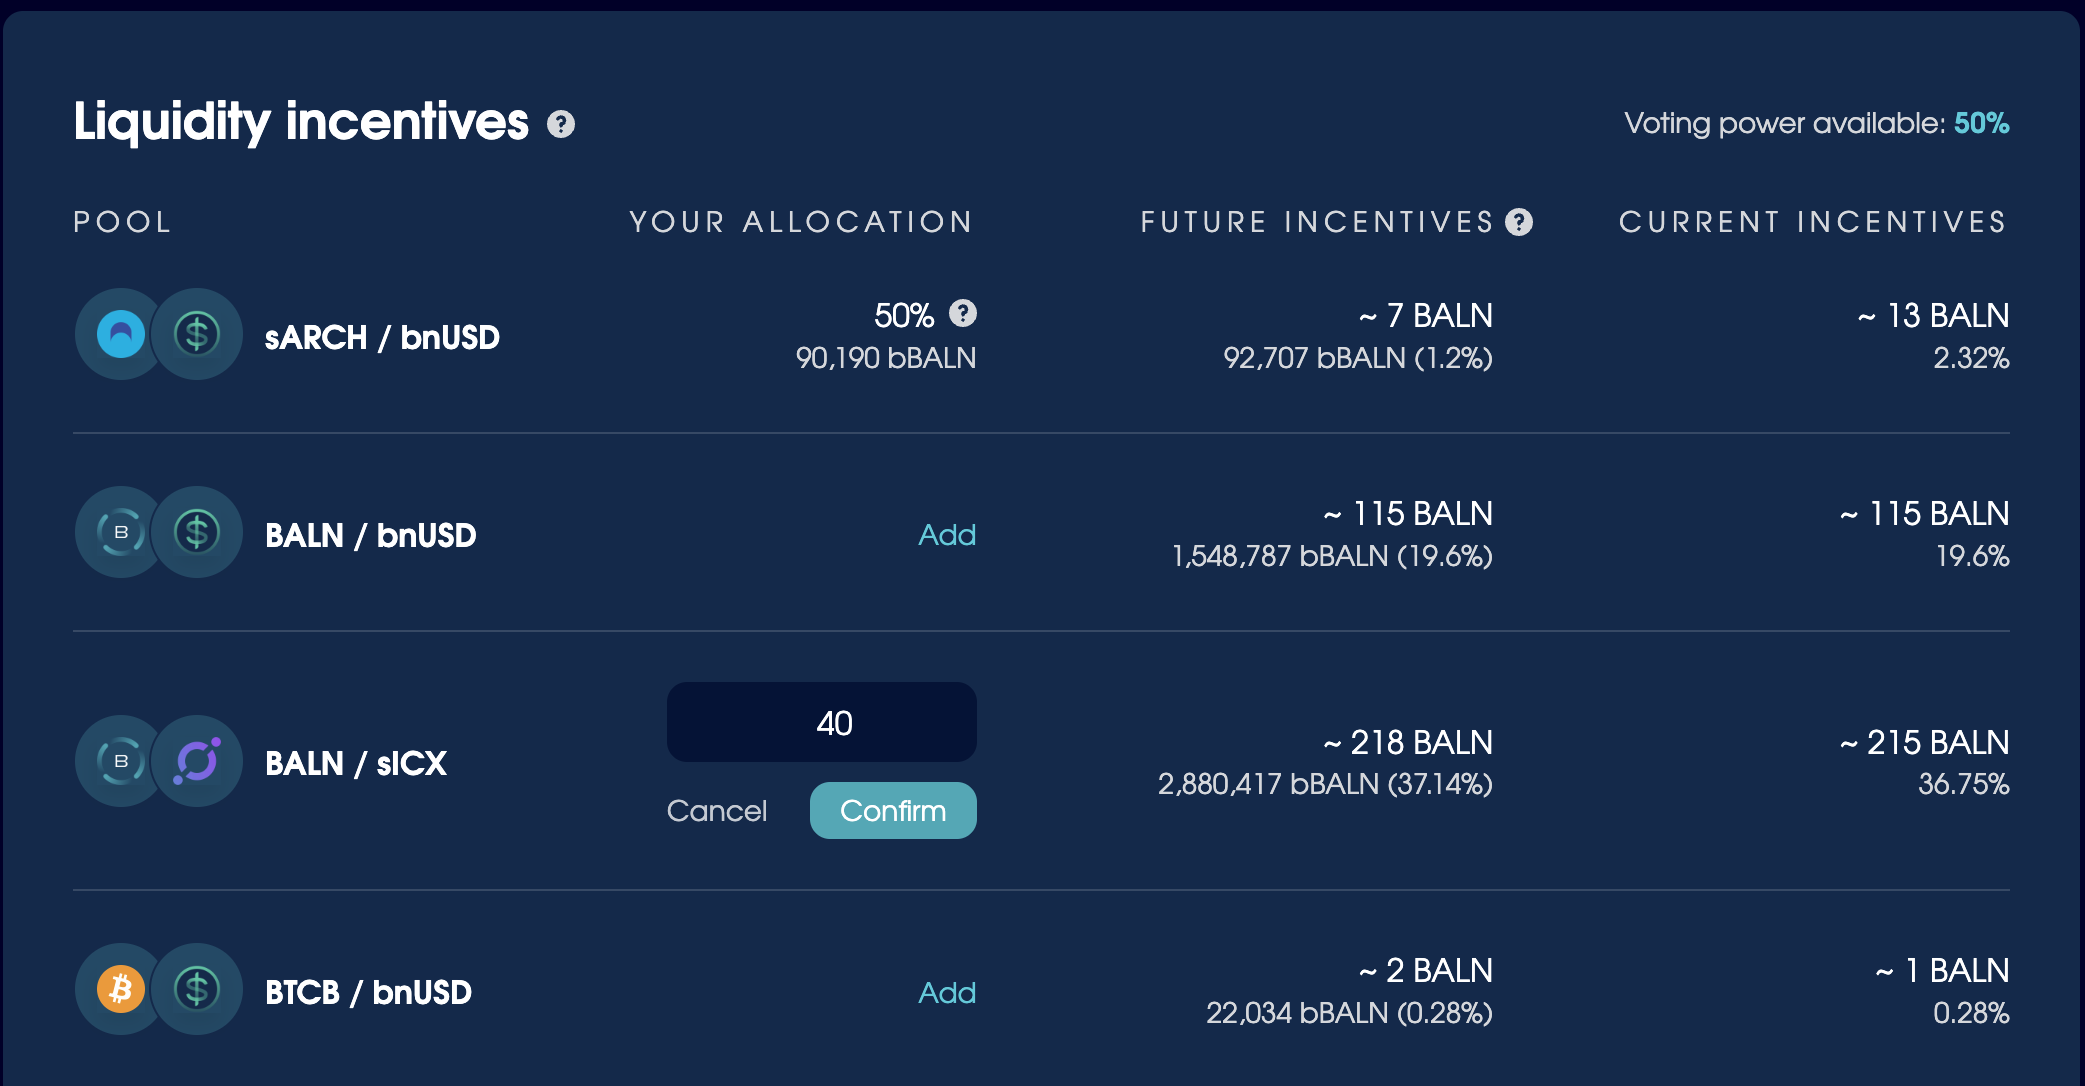 The liquidity incentives section showing the ability to add, edit, and confirm your allocation for a range of liquidity pools